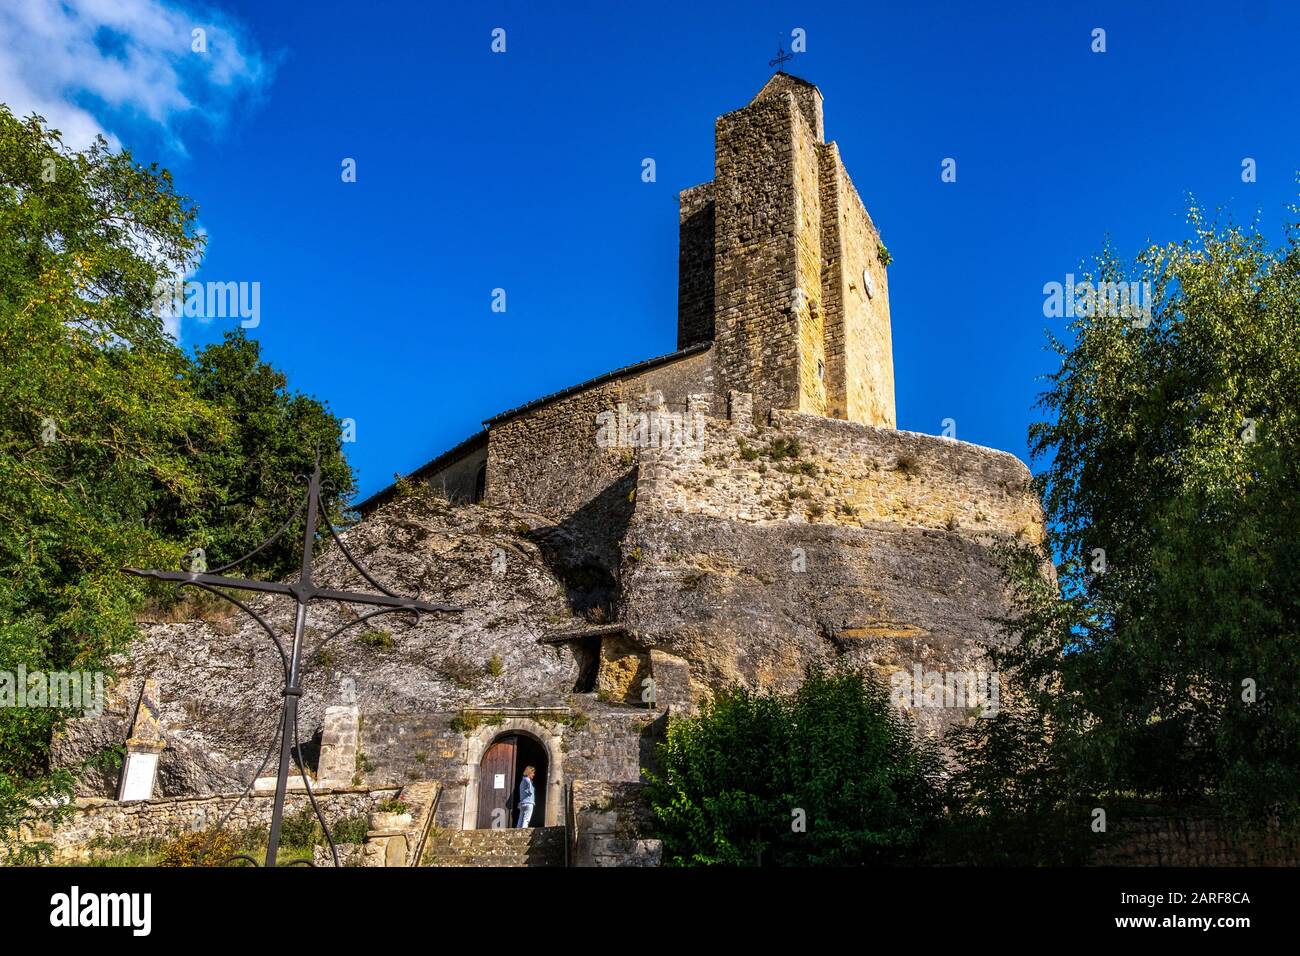 France, Occitanie, Ariege, Vals. It is known for the church ''Eglise Rupestre de Vals'' which is built into the giant rocks that make up its Stock Photo